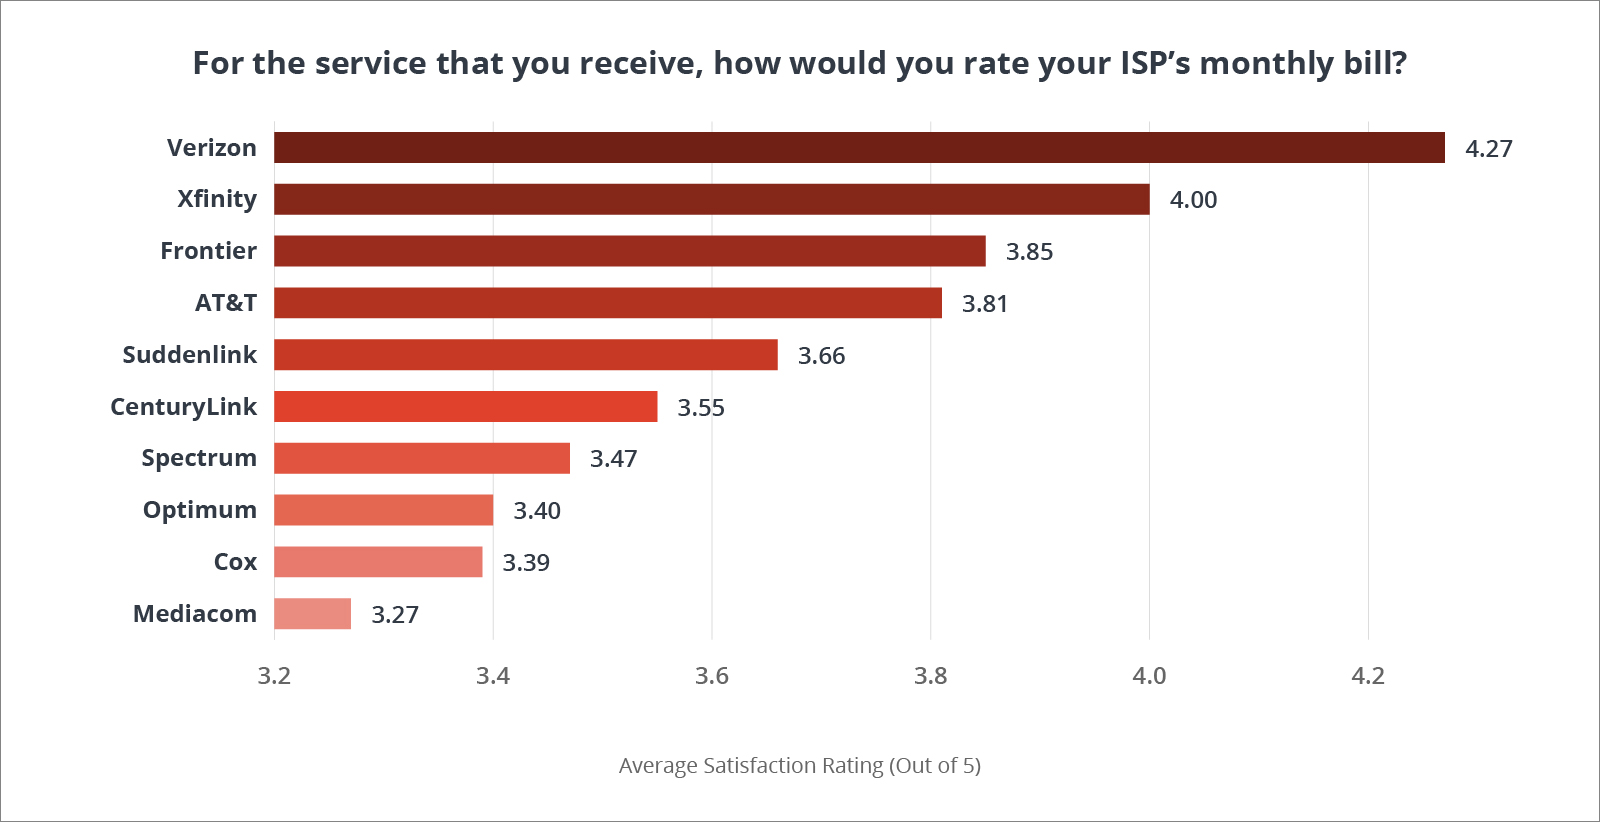 Chart ranking providers based on question, "For the service that you receive, how would you rate your ISP's monthly bill?"